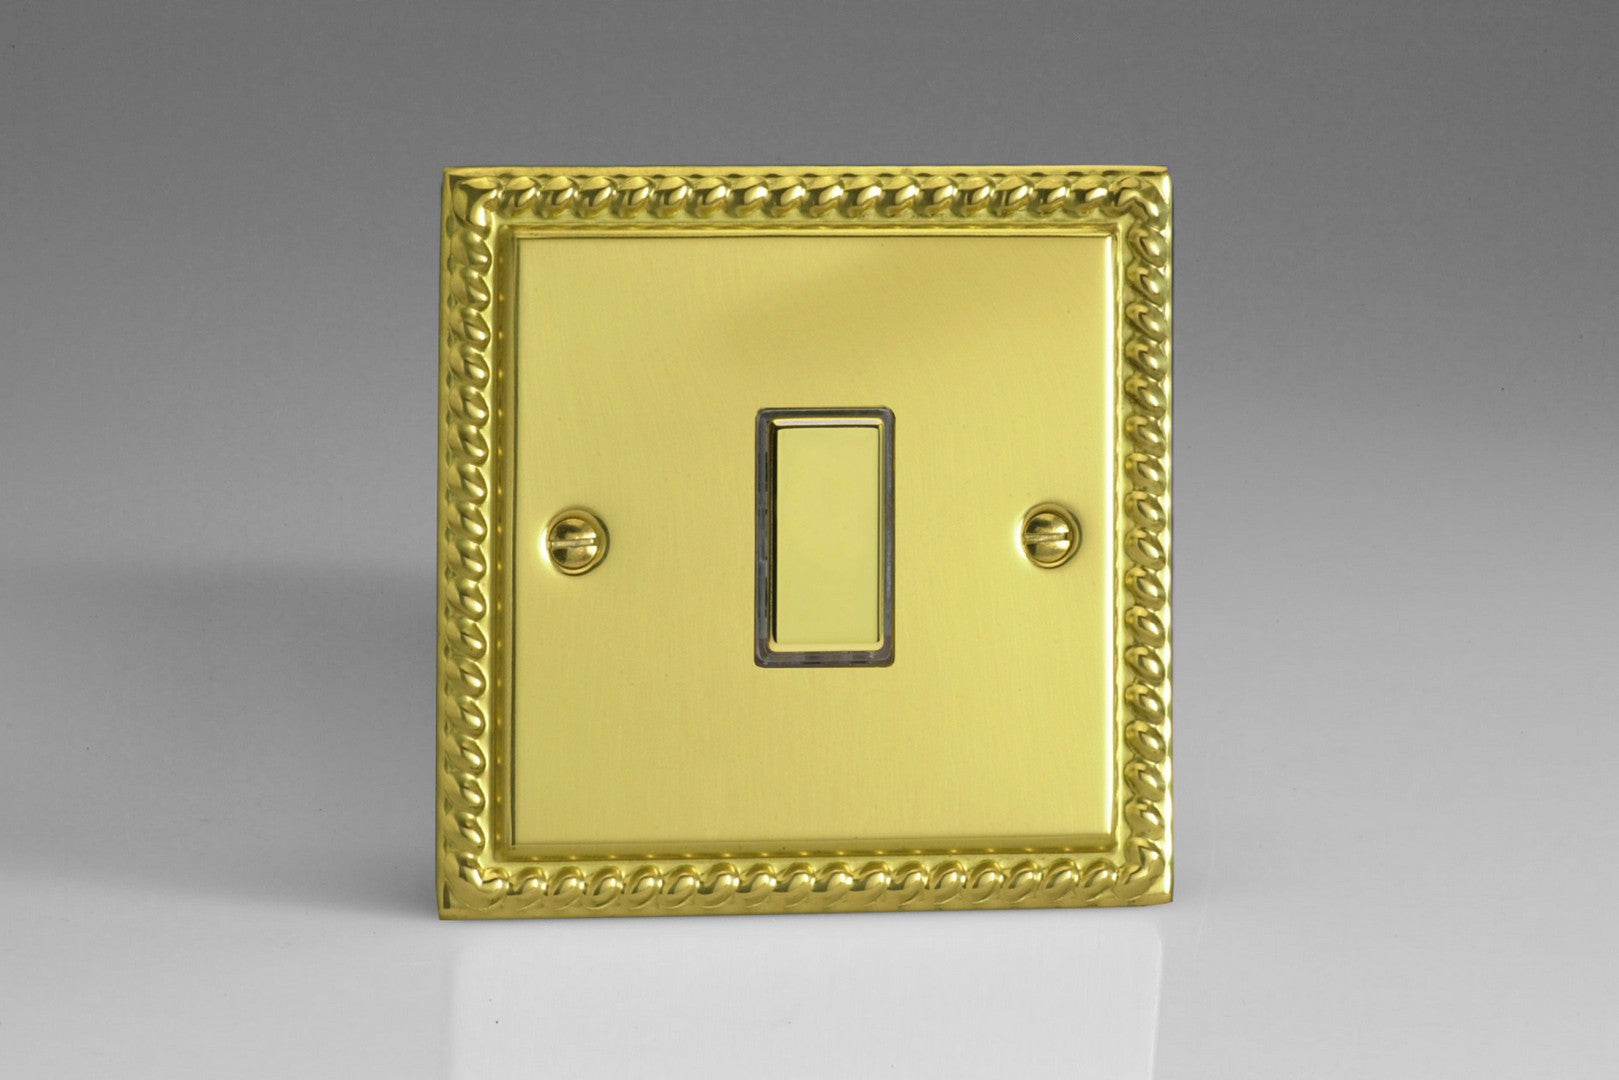 Varilight JGES001 Classic Georgian Brass 1-Gang Tactile Touch Control Dimming Slave for use with Multi-Point Touch or Remote Master on 2-Way Circuits